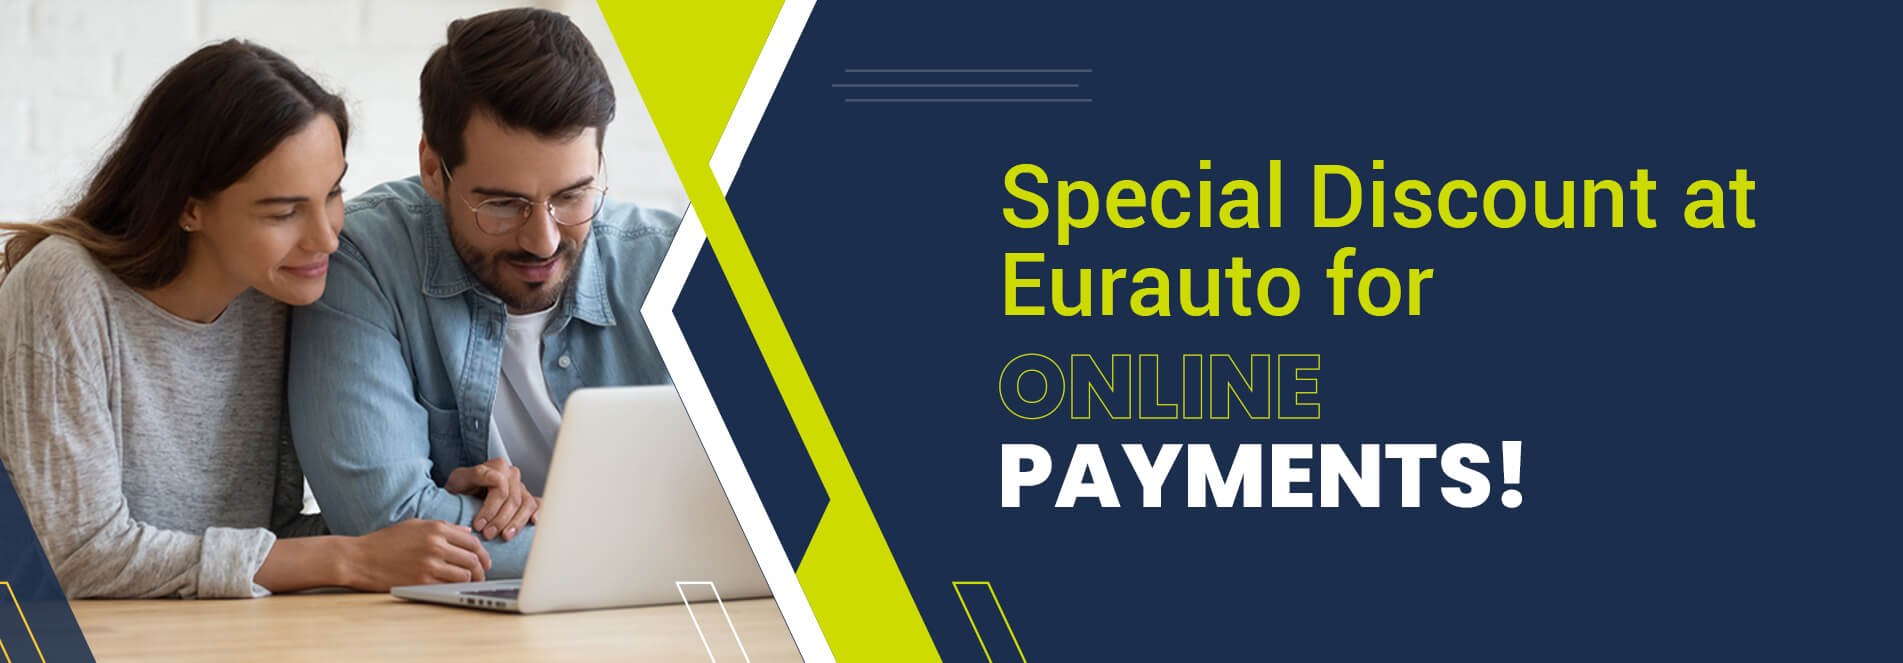 Special Discount at Eurauto for Online Payments!